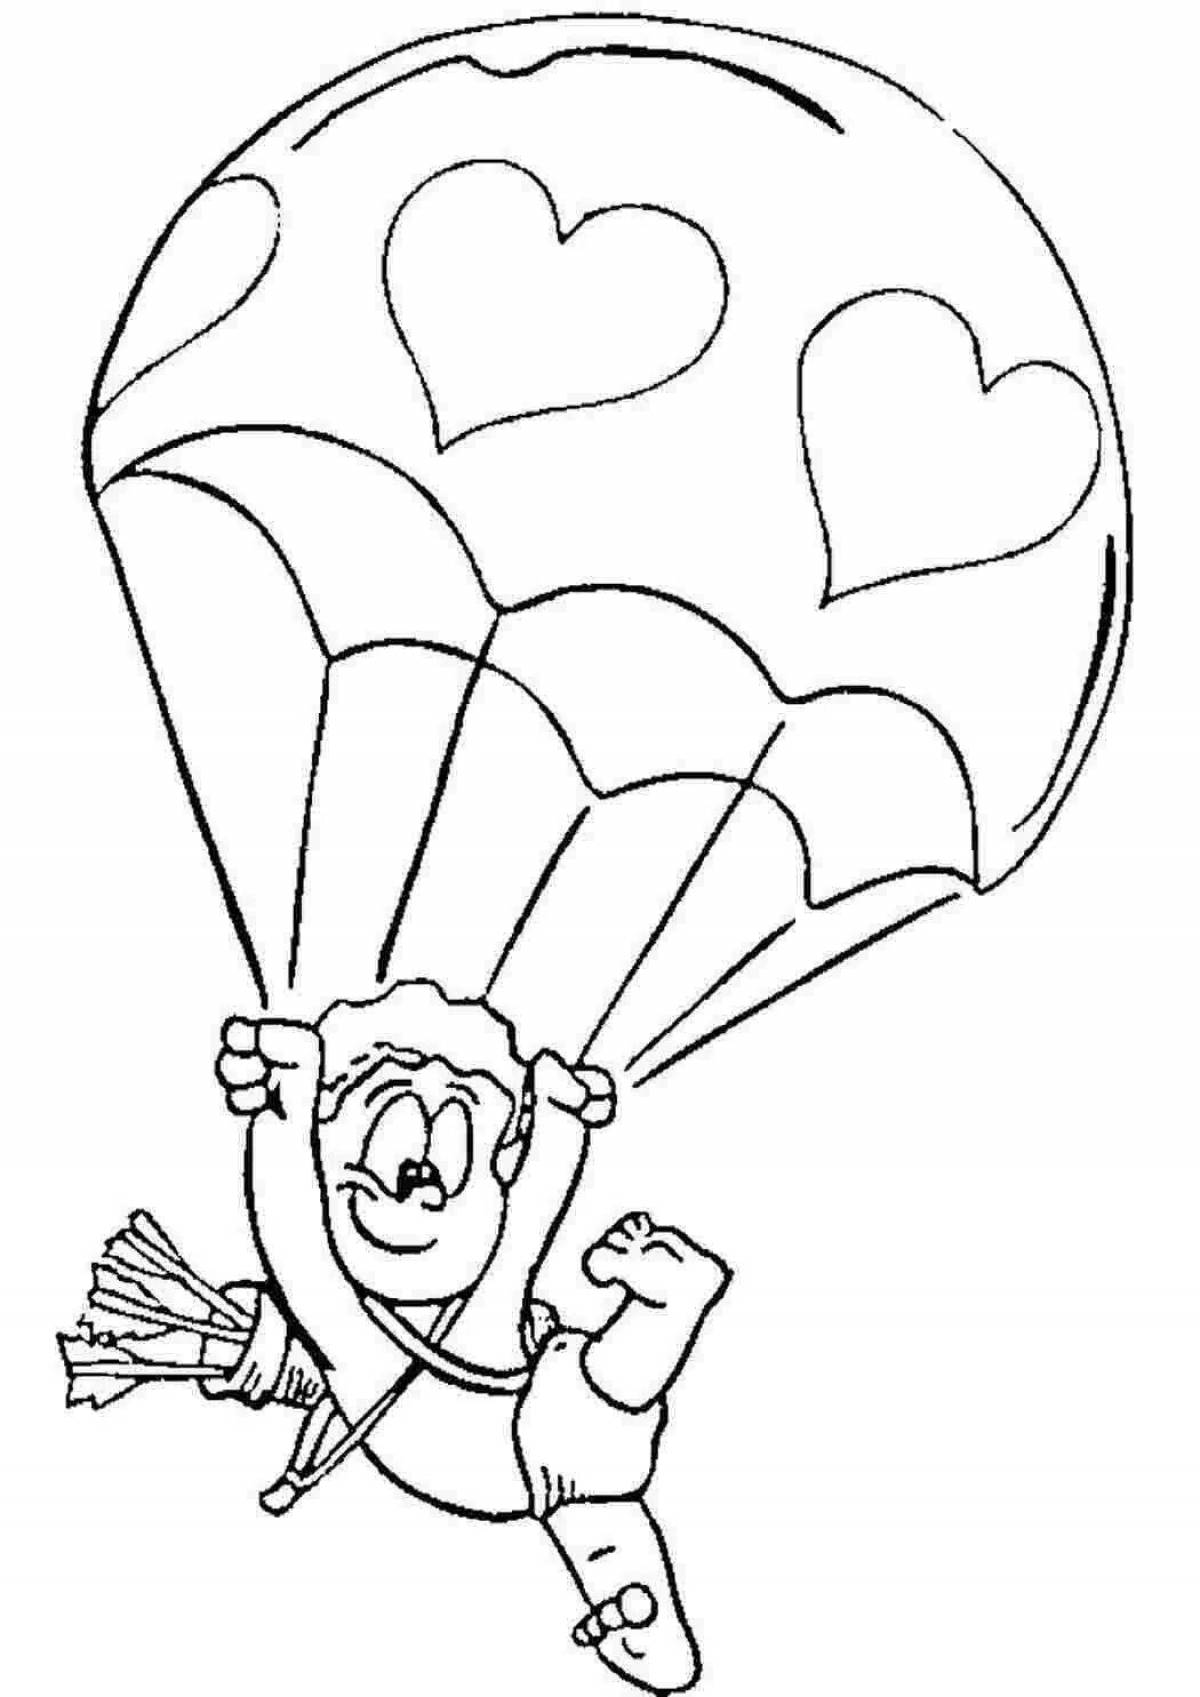 Coloring book shining parachute for preschoolers